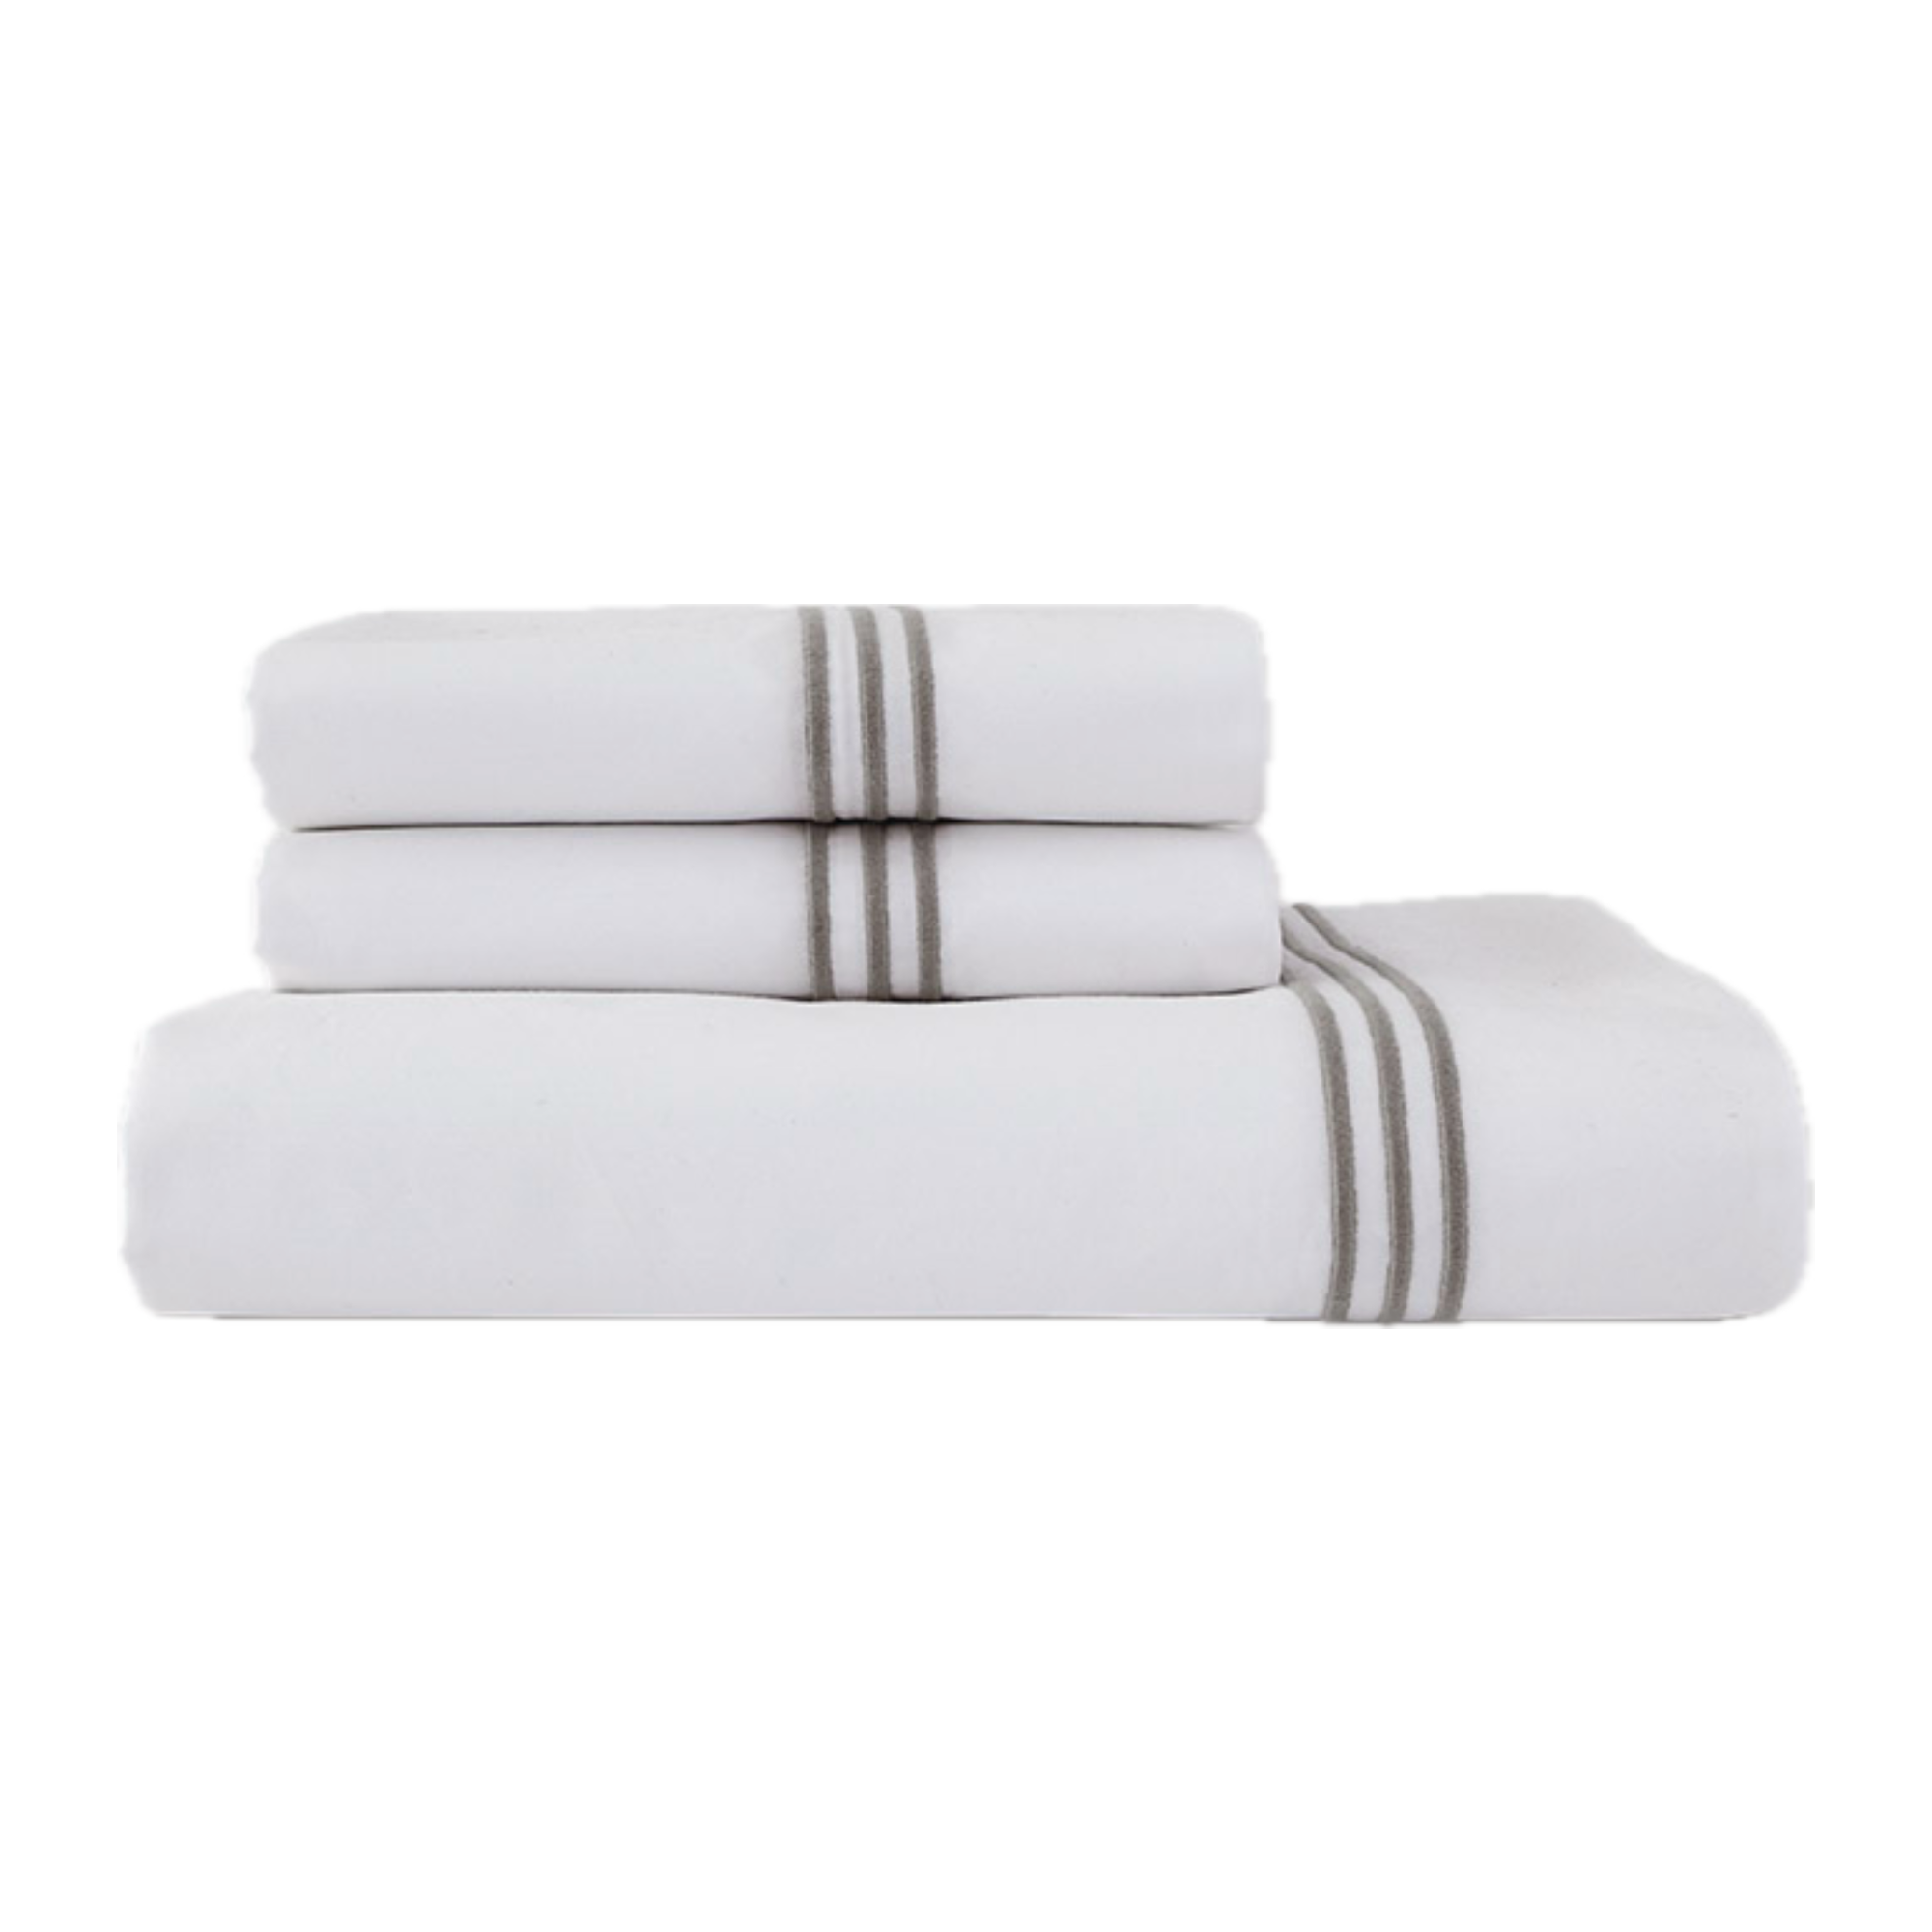 Sheet Set Stack of Downtown Company Madison Bedding Collection in Gray Color